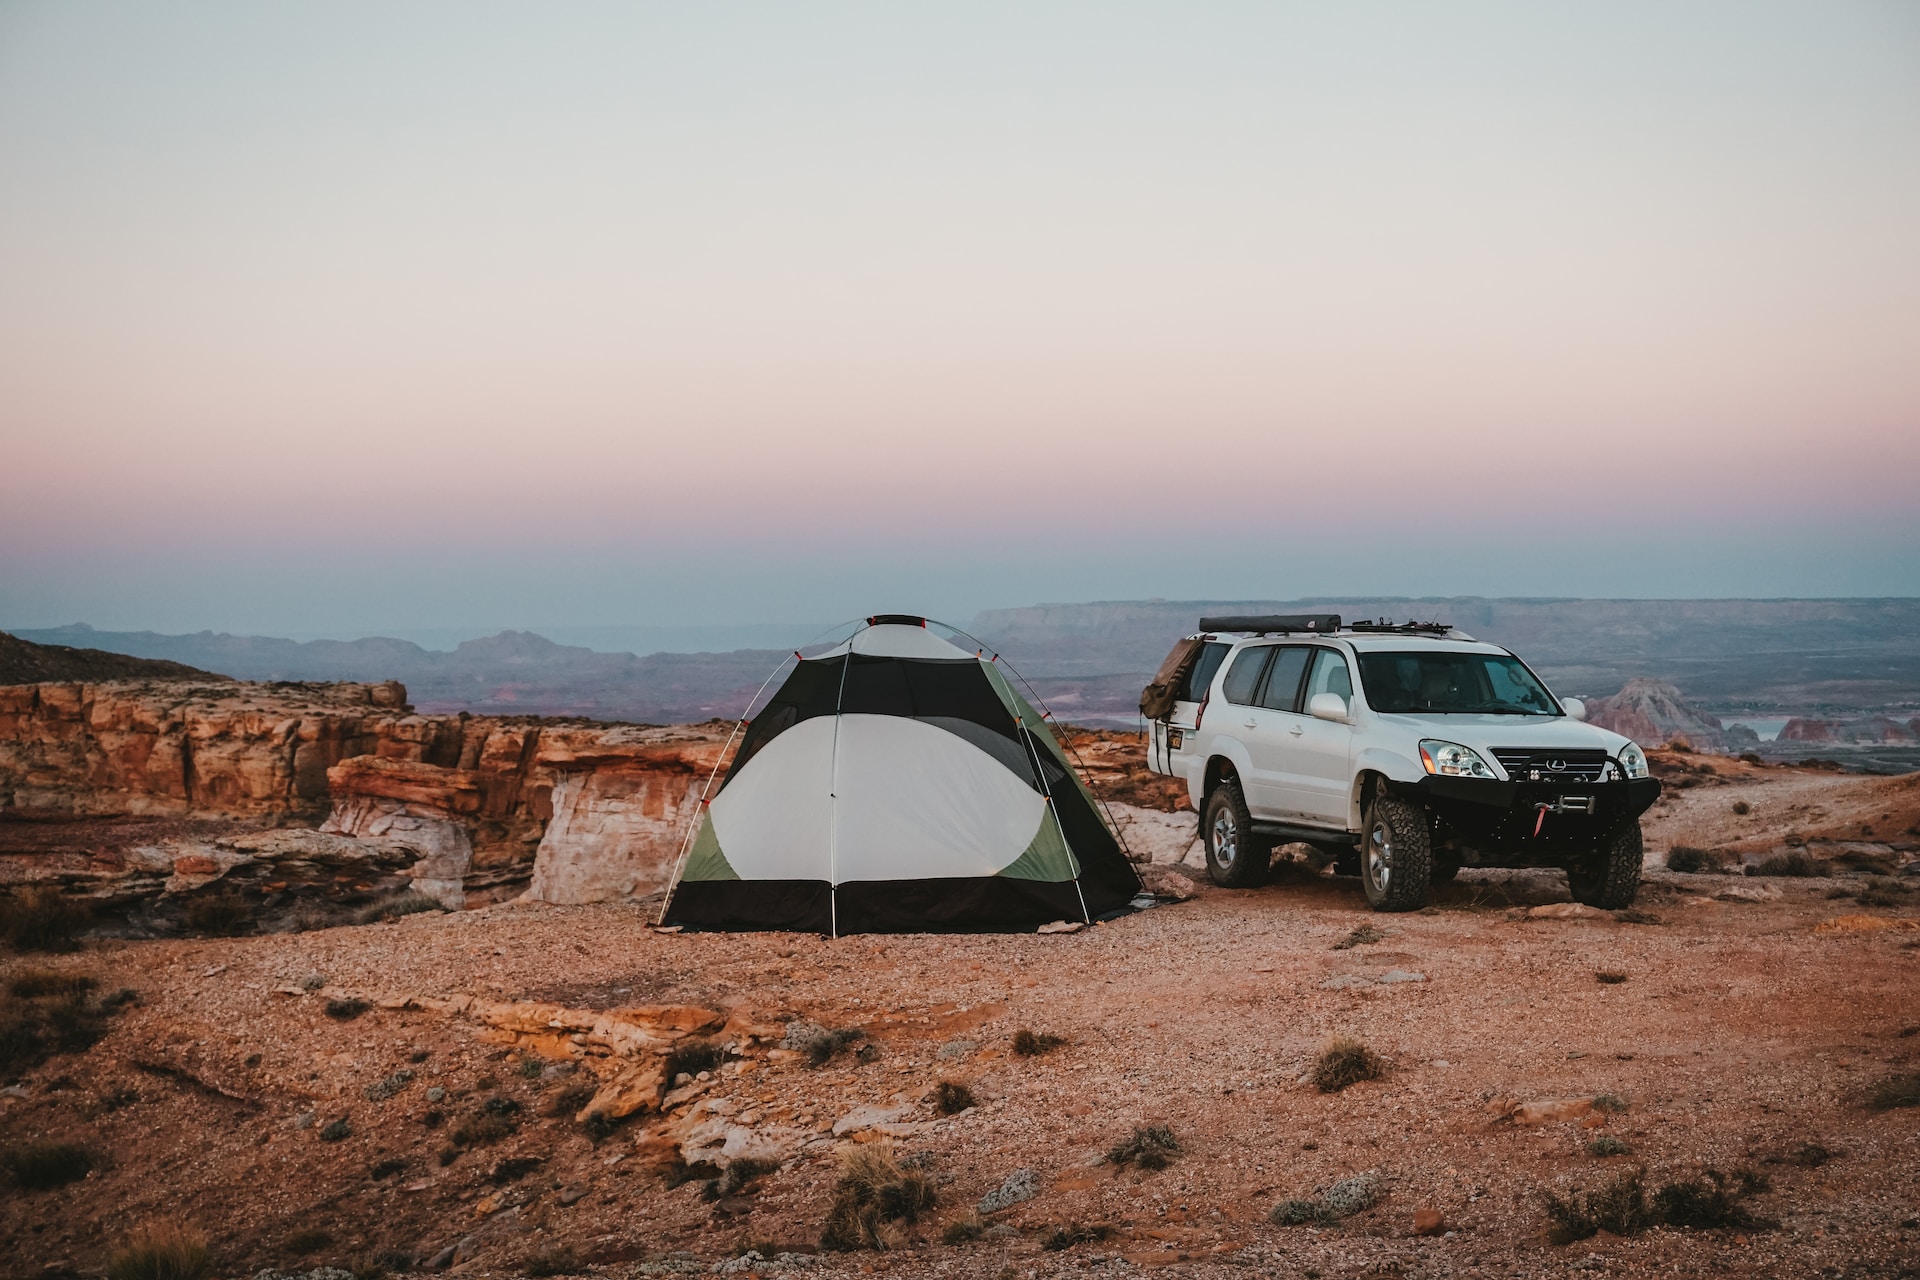 tent and car set up by canyons at sunset